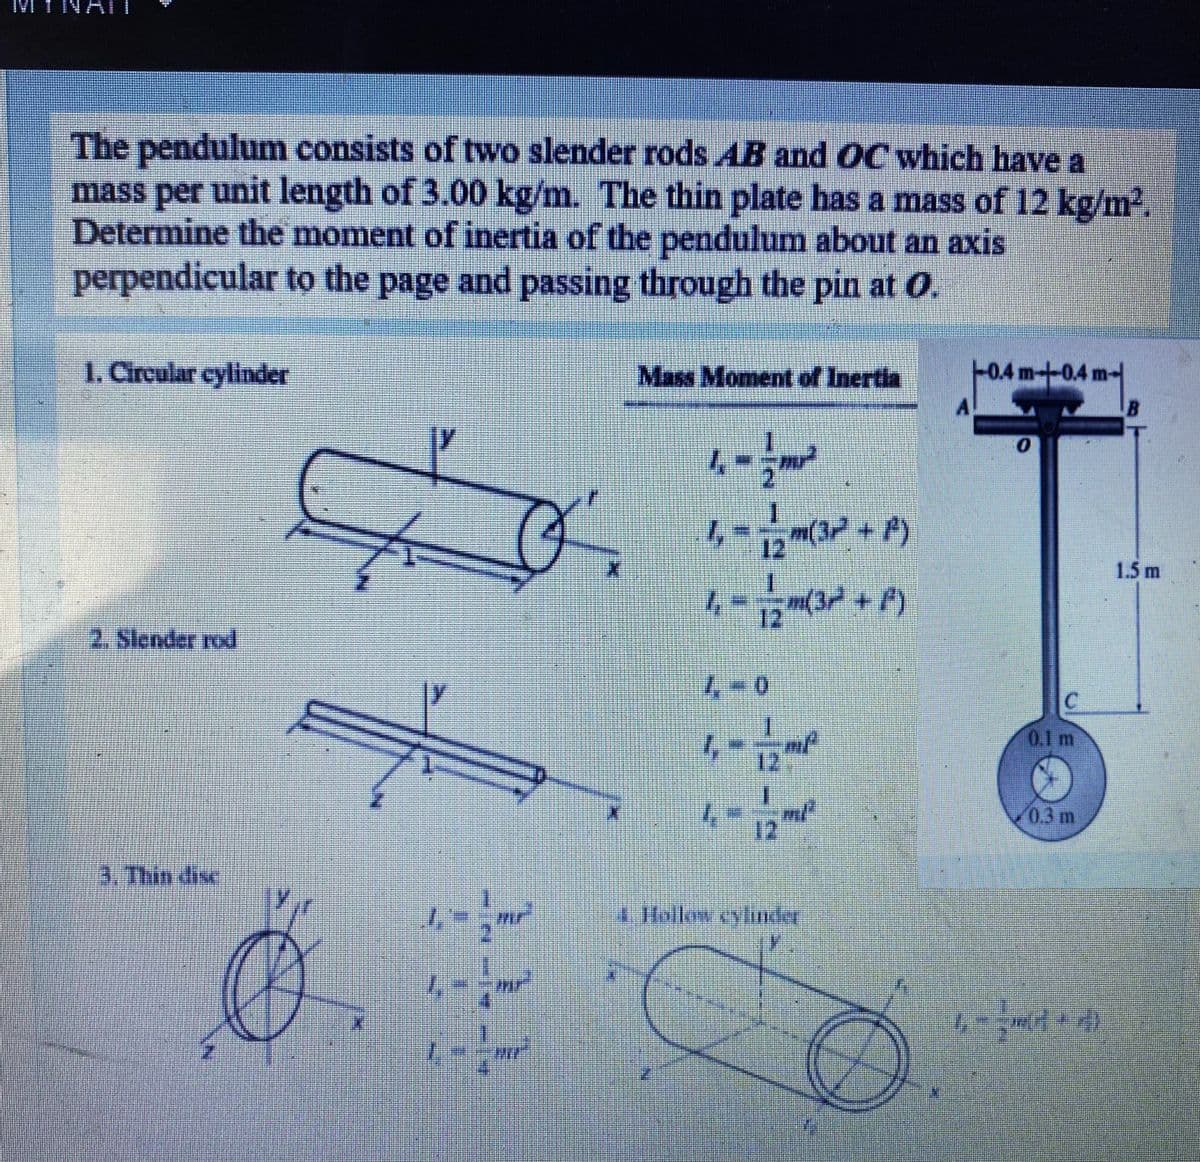 IMI INAT
IVI
The pendulum consists of two slender rods AB and OC which have a
mass per unit length of 3.00 kg/m. The thin plate has a mass of 12 kg/m2.
Determine the moment of inertia of the pendulum about an axis
perpendicular to the page and passing through the pin at O.
1. Circular cylinder
Mass Moment of Inertia
-+0.4m-
A
m(32 + A)
12
1.5 m
12
(3+P)
2. Slender rod
4-0
0.1 m
12
1.
0.3m
12
3. Thin dise
mr
4 Hollow cylindey
ir
